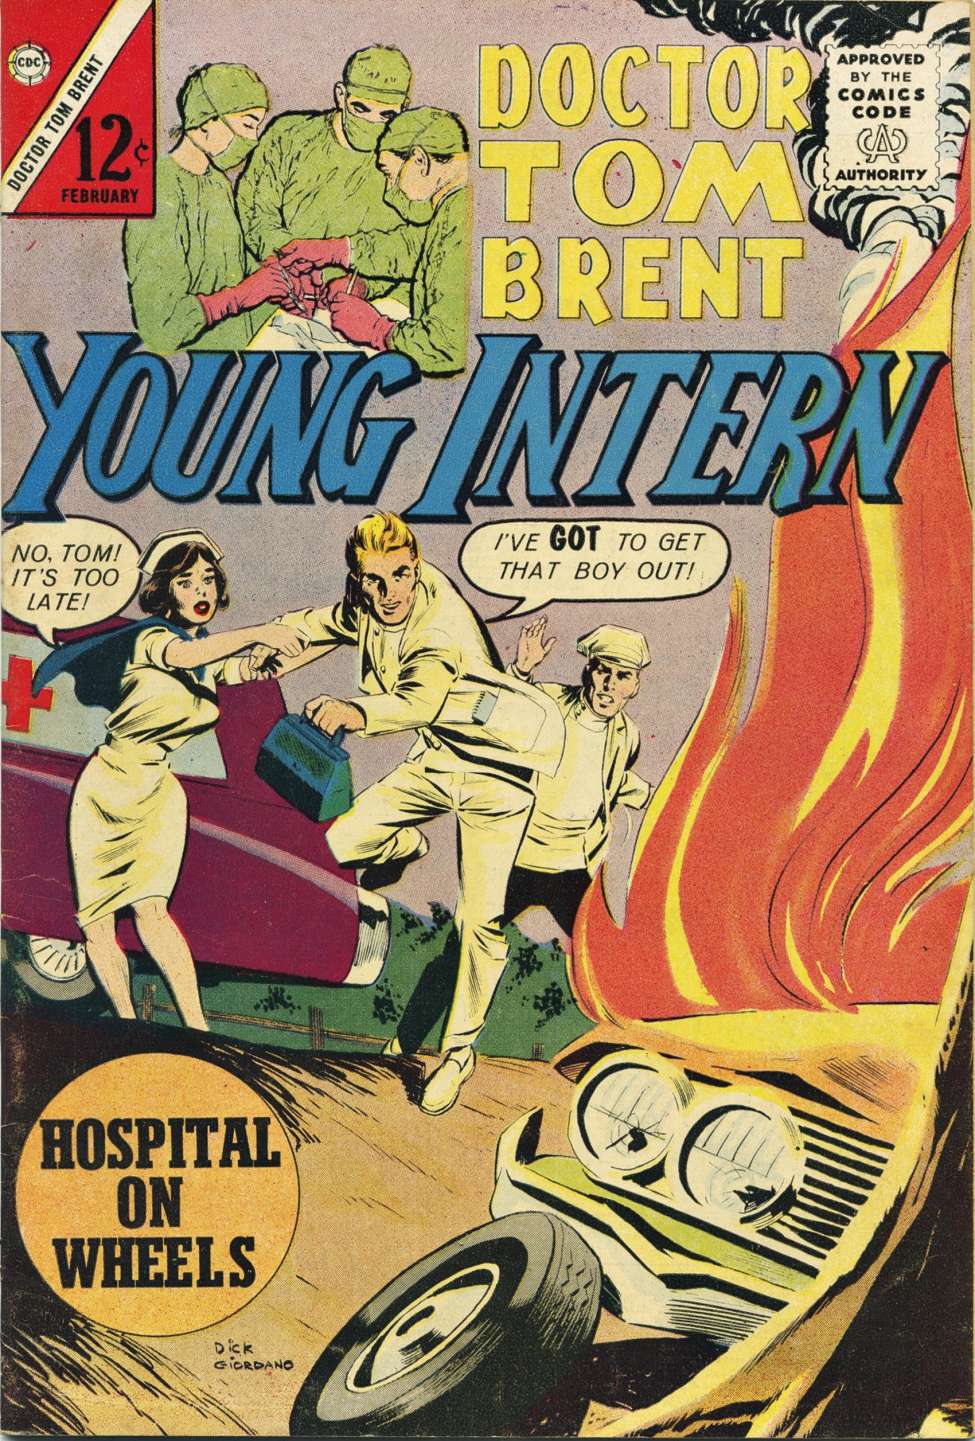 Book Cover For Doctor Tom Brent, Young Intern 1